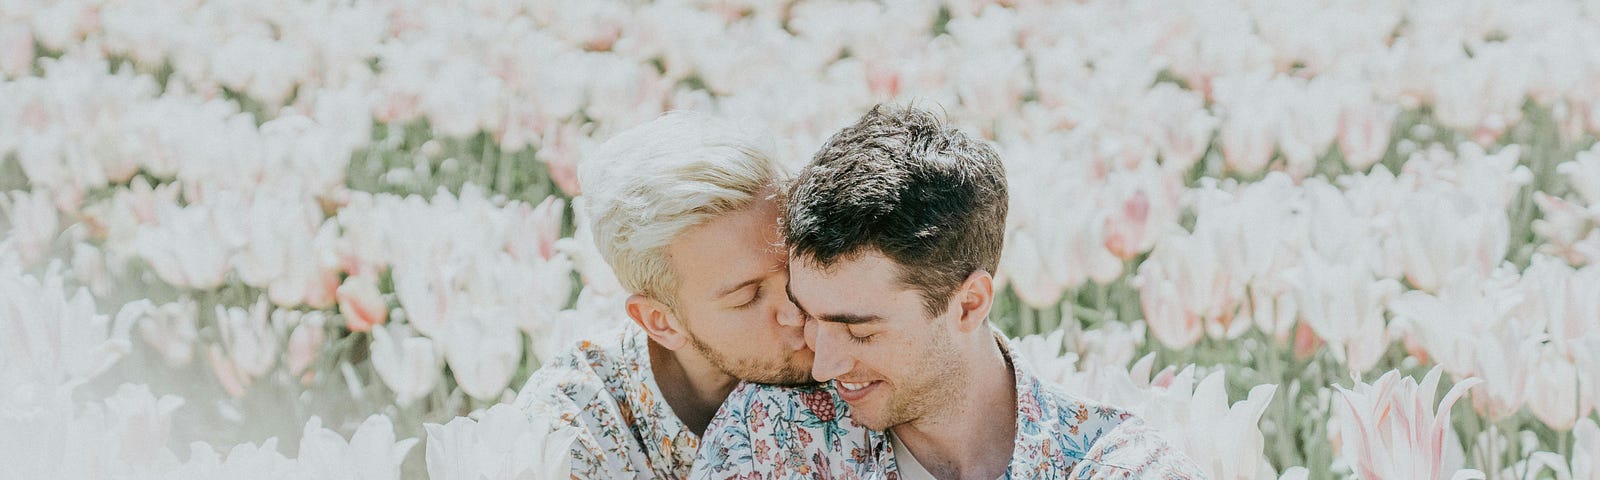 A man kisses the neck of another man as they sit in a field of flowers